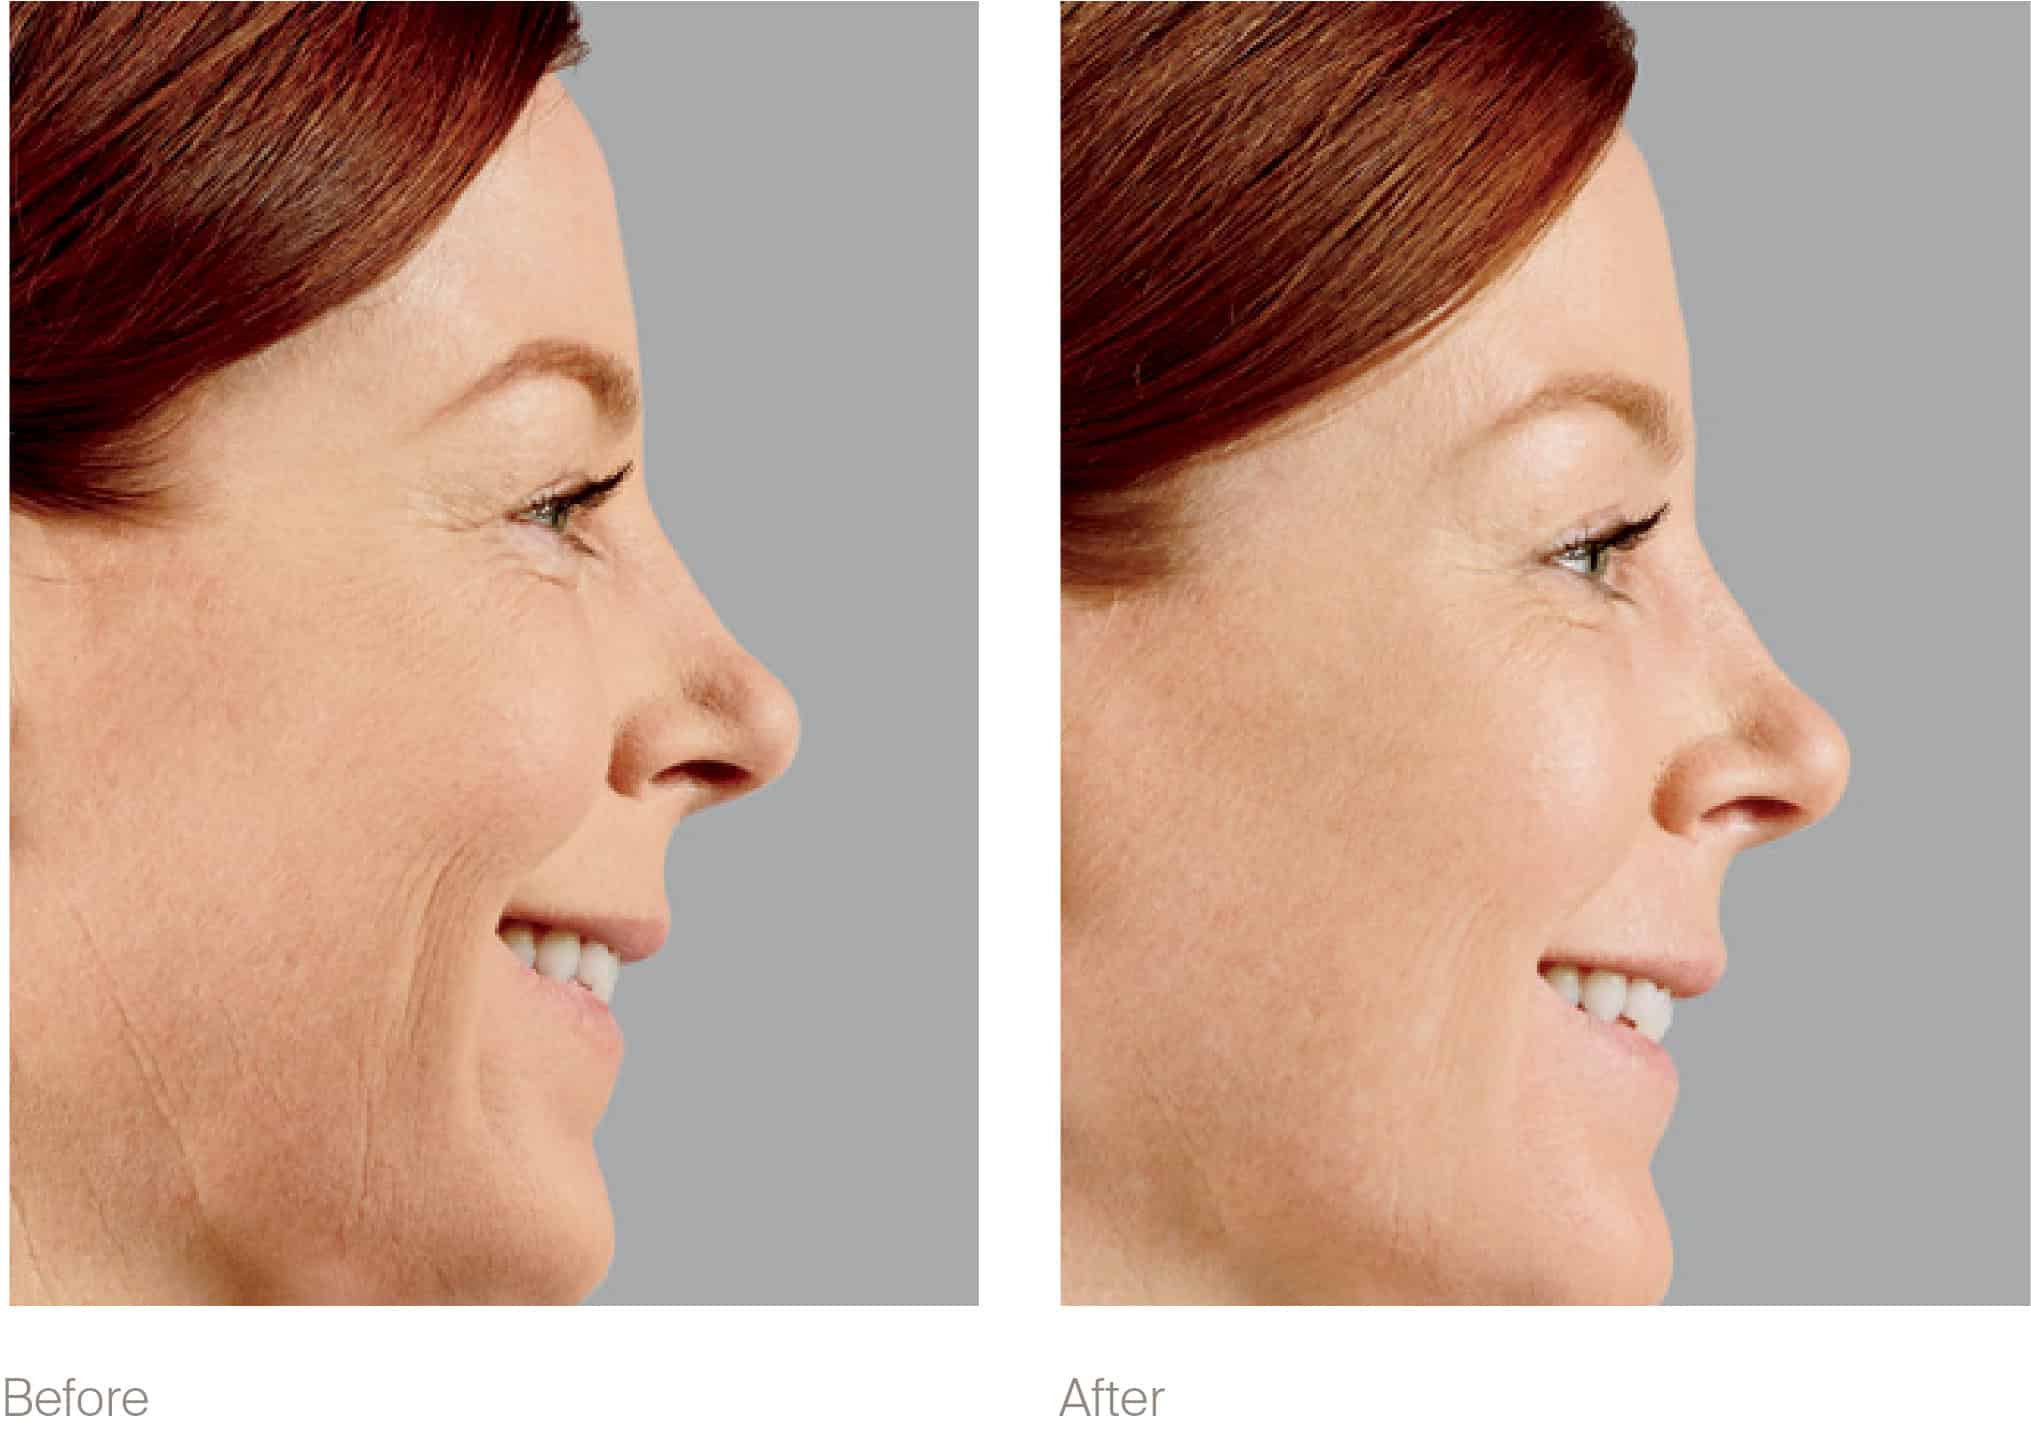 Before and after side-view photos of a woman's face show improvements from use of dermal fillers